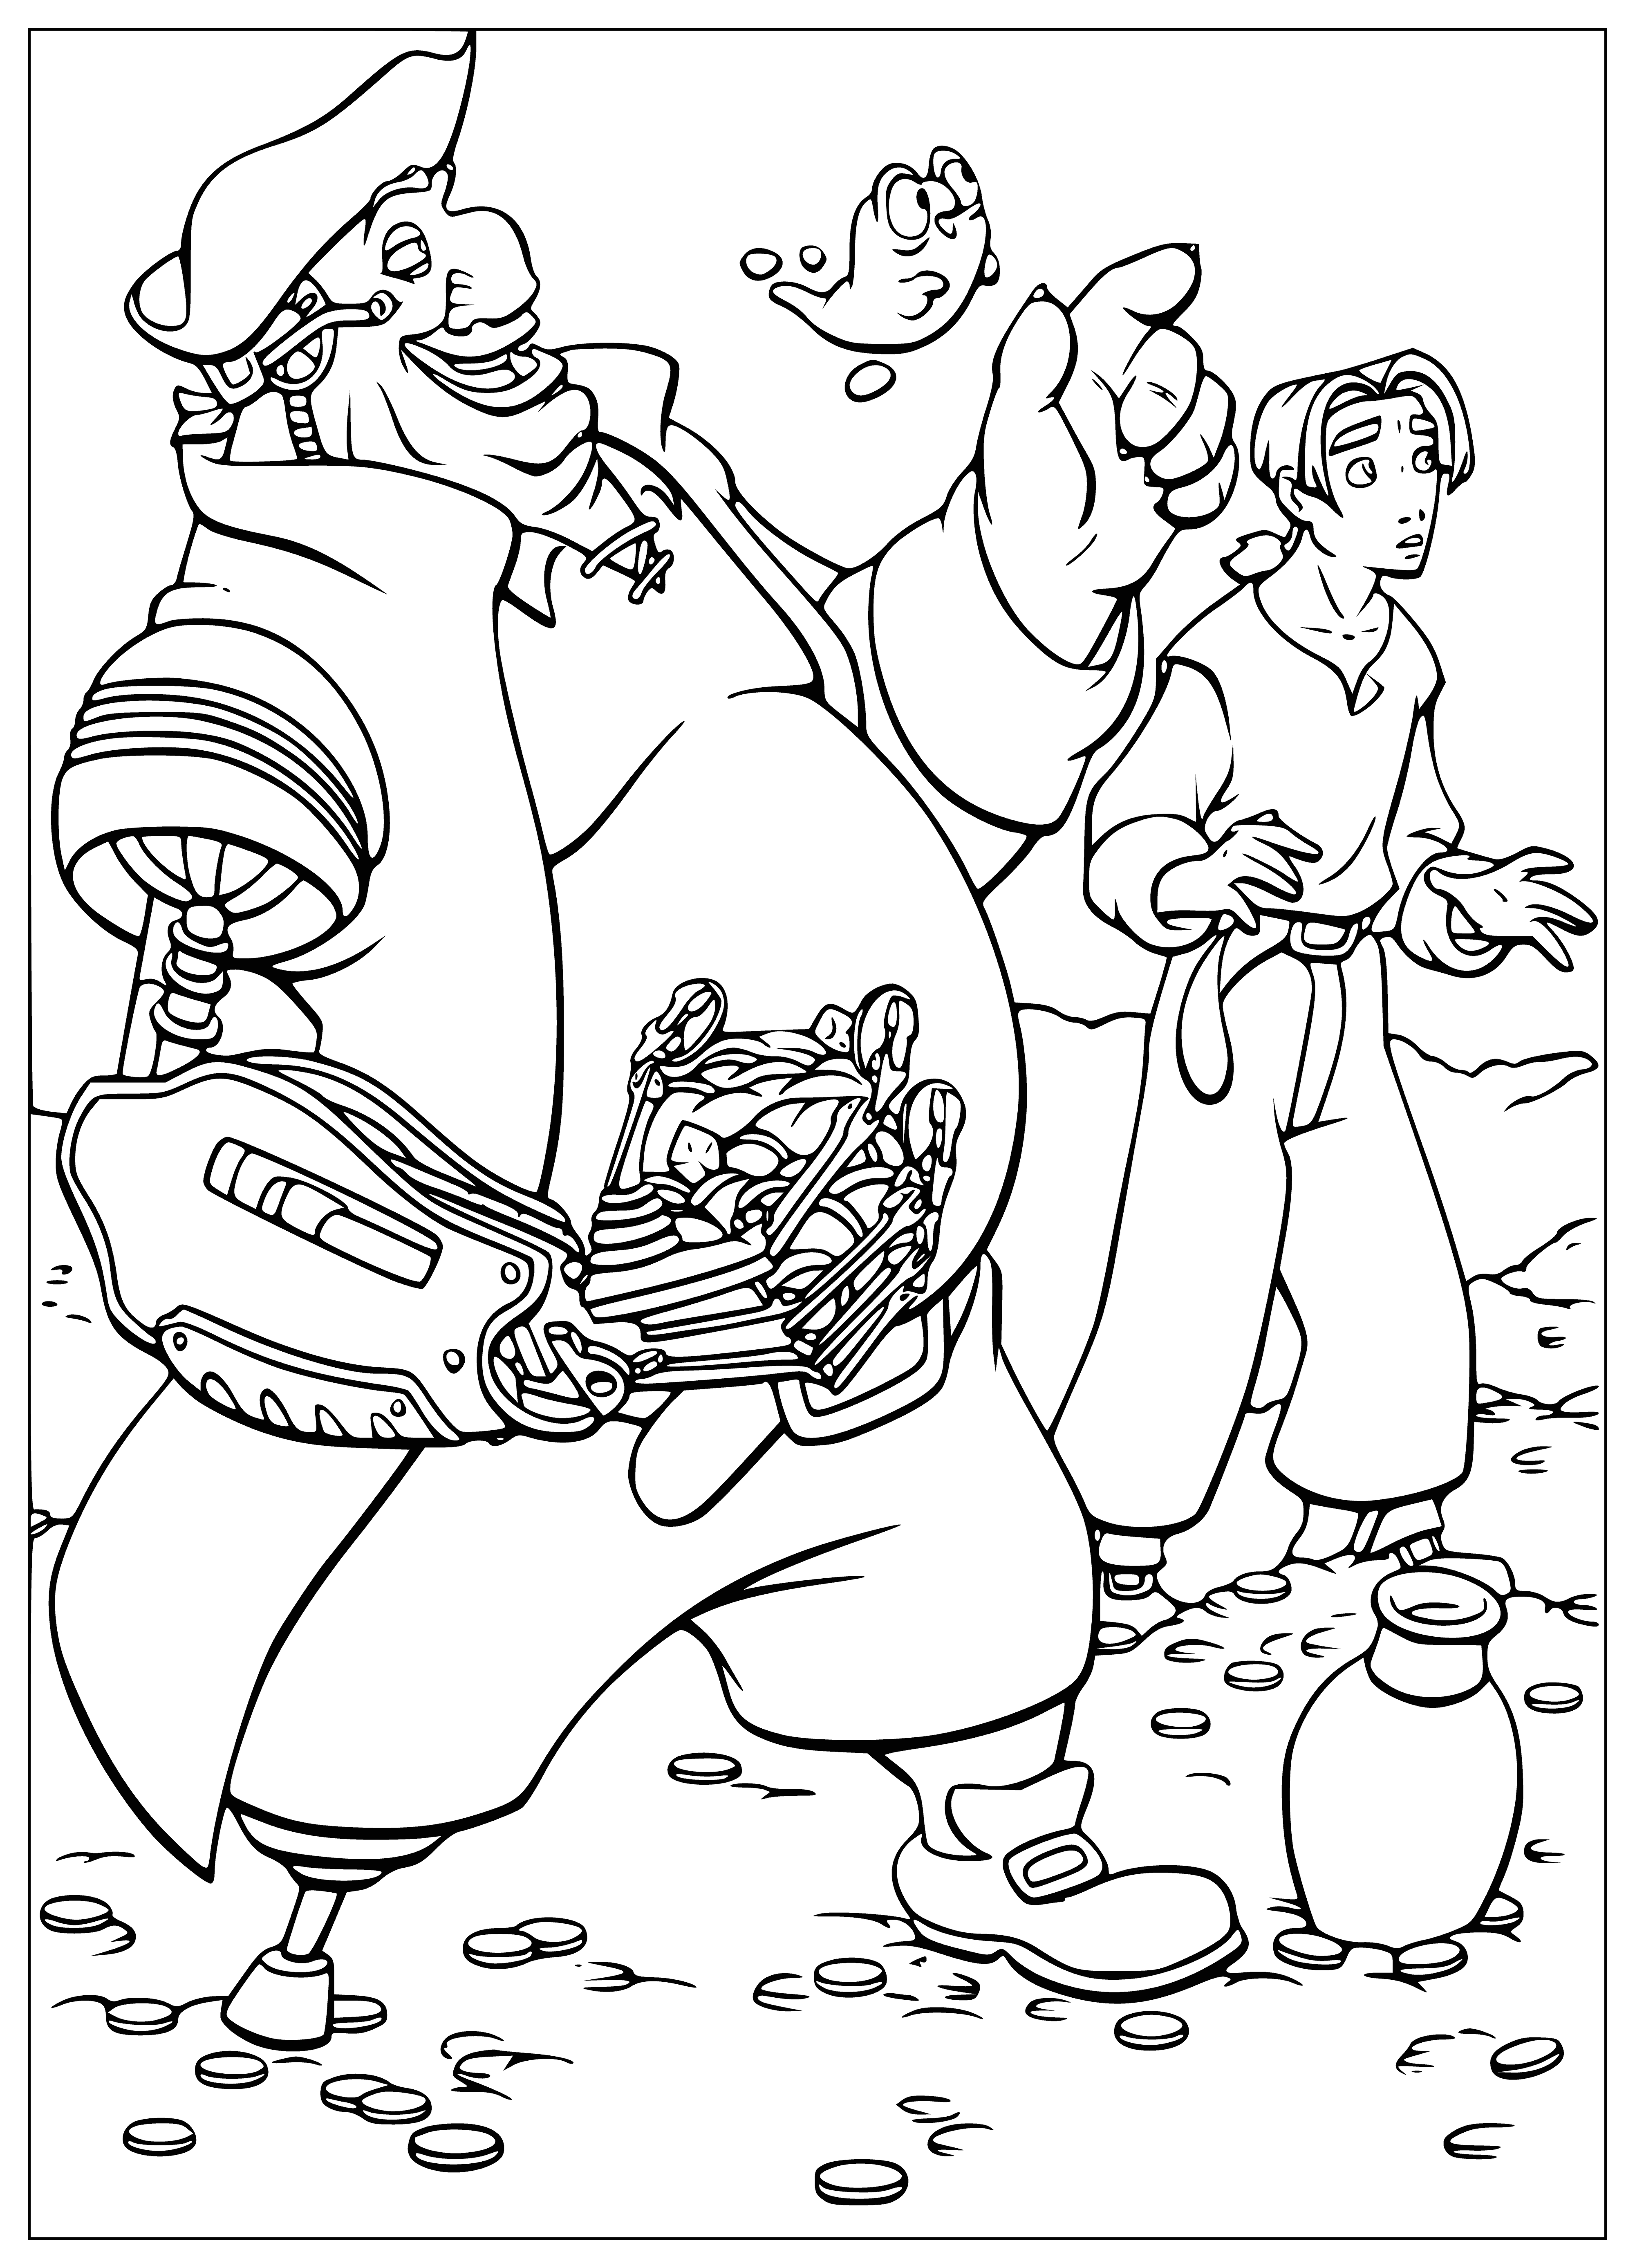 coloring page: Planet made of gold & treasure so big it takes up entire coloring page, no other objects in sight. #coloringbook